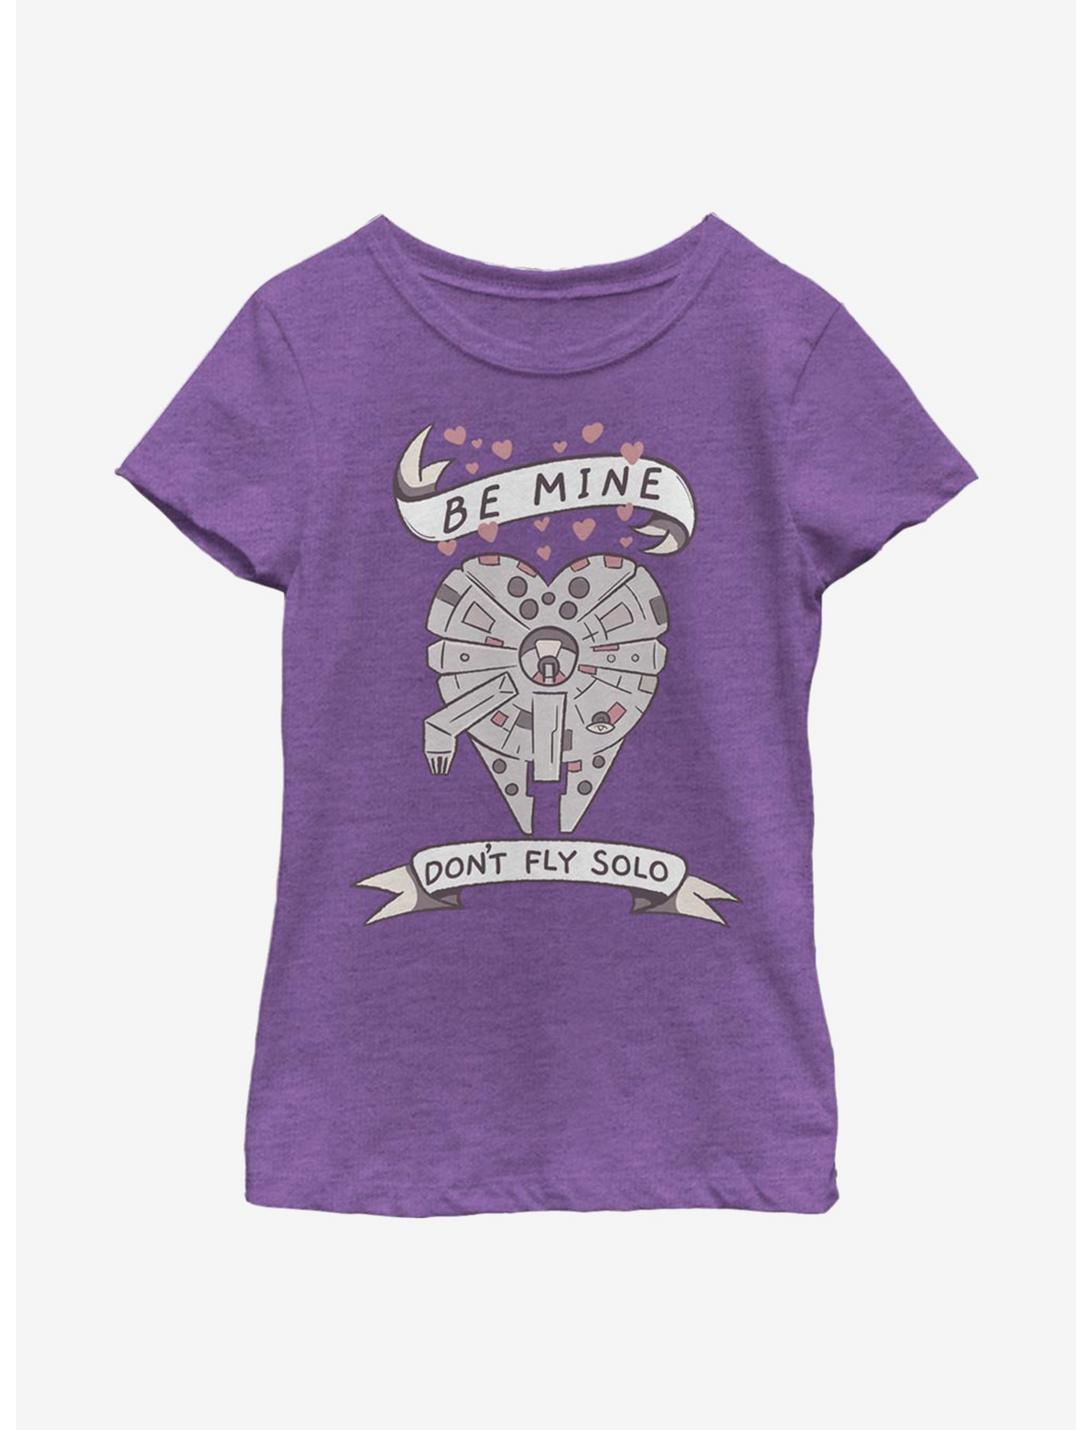 Star Wars Be Mine Falcon Youth Girls T-Shirt, PURPLE BERRY, hi-res